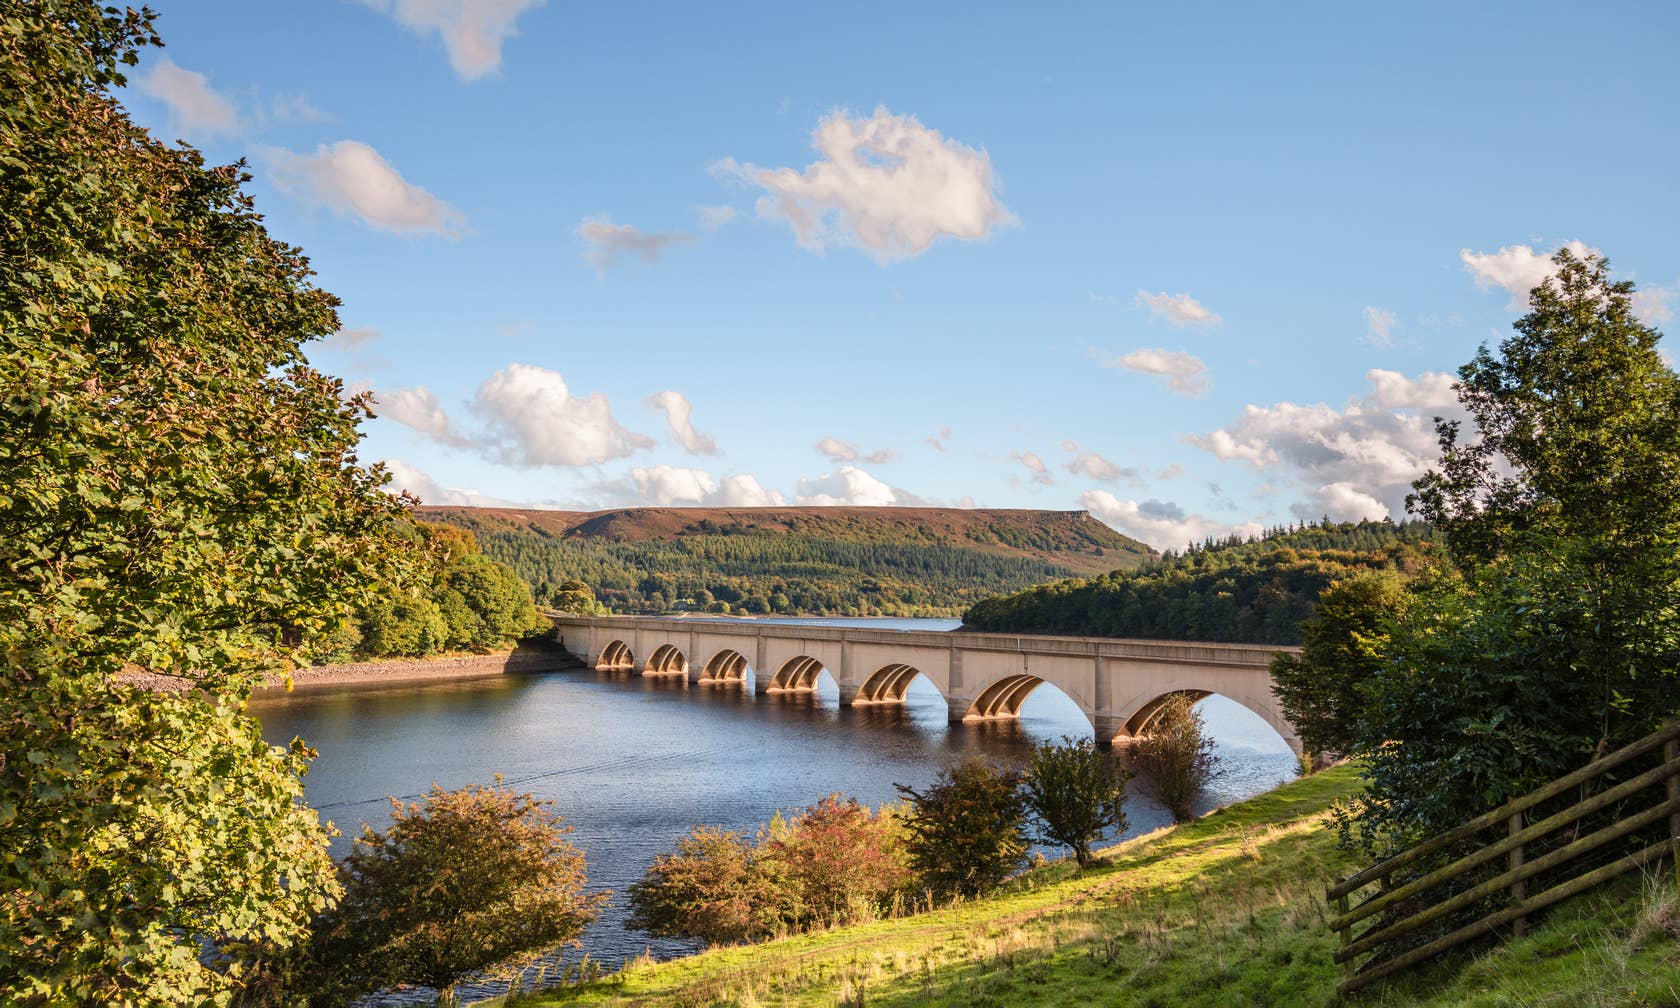 Holiday cottages in Derbyshire